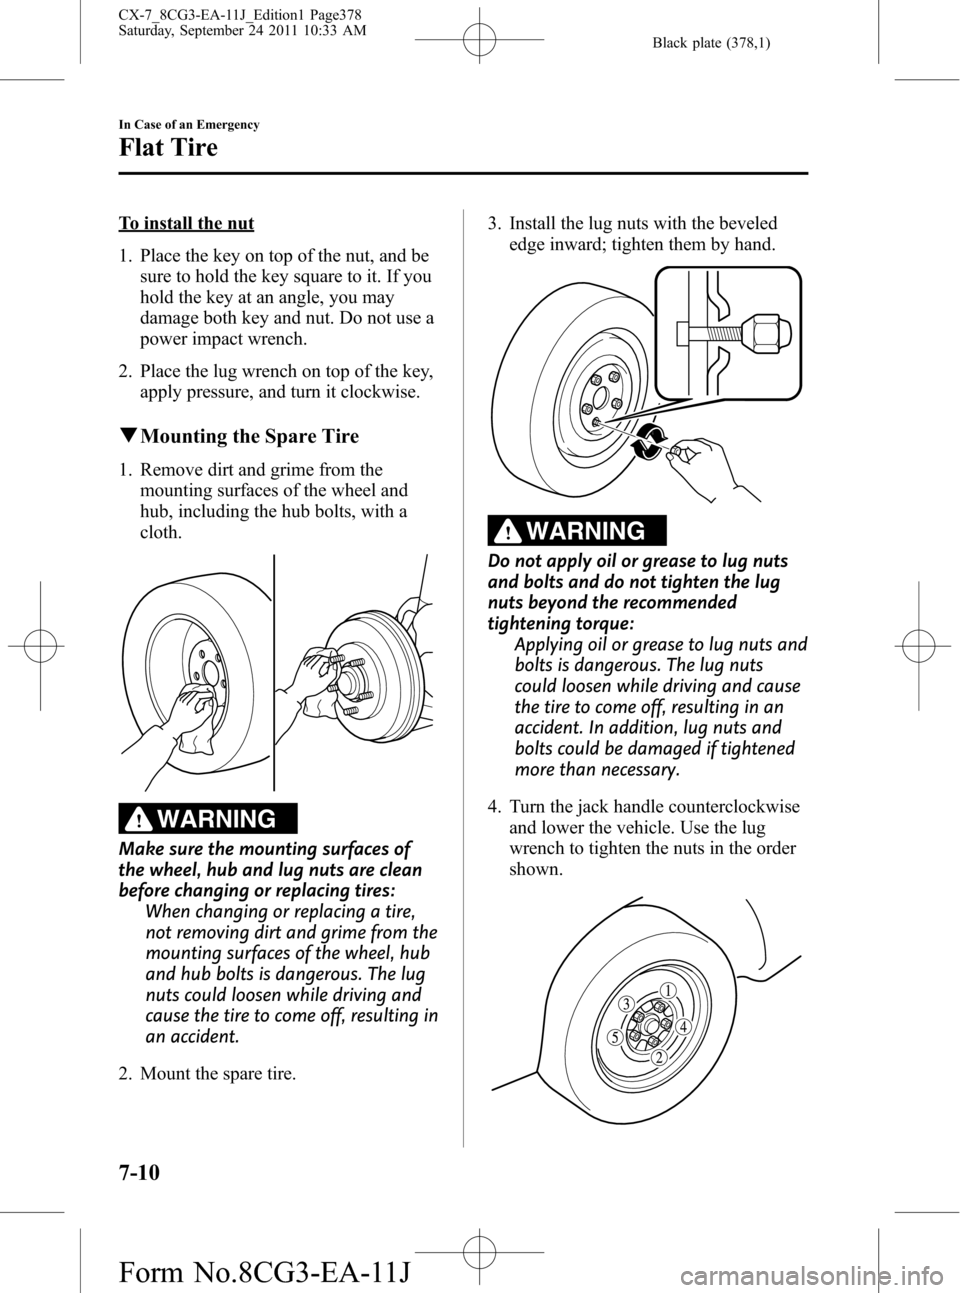 MAZDA MODEL CX-7 2012  Owners Manual (in English) Black plate (378,1)
To install the nut
1. Place the key on top of the nut, and be
sure to hold the key square to it. If you
hold the key at an angle, you may
damage both key and nut. Do not use a
powe